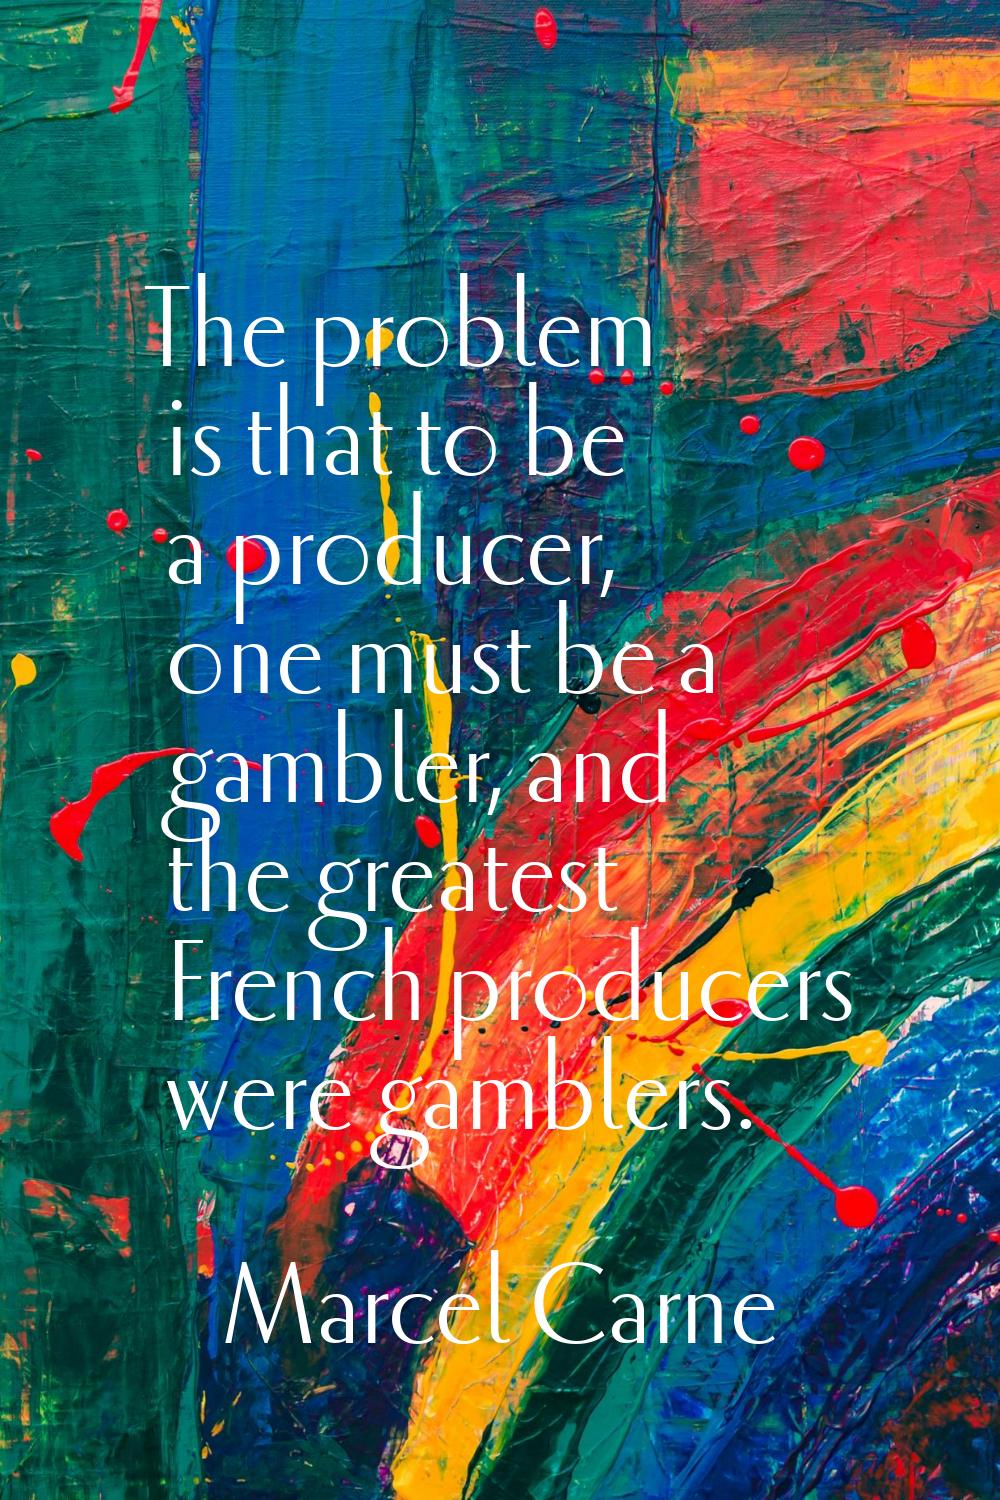 The problem is that to be a producer, one must be a gambler, and the greatest French producers were